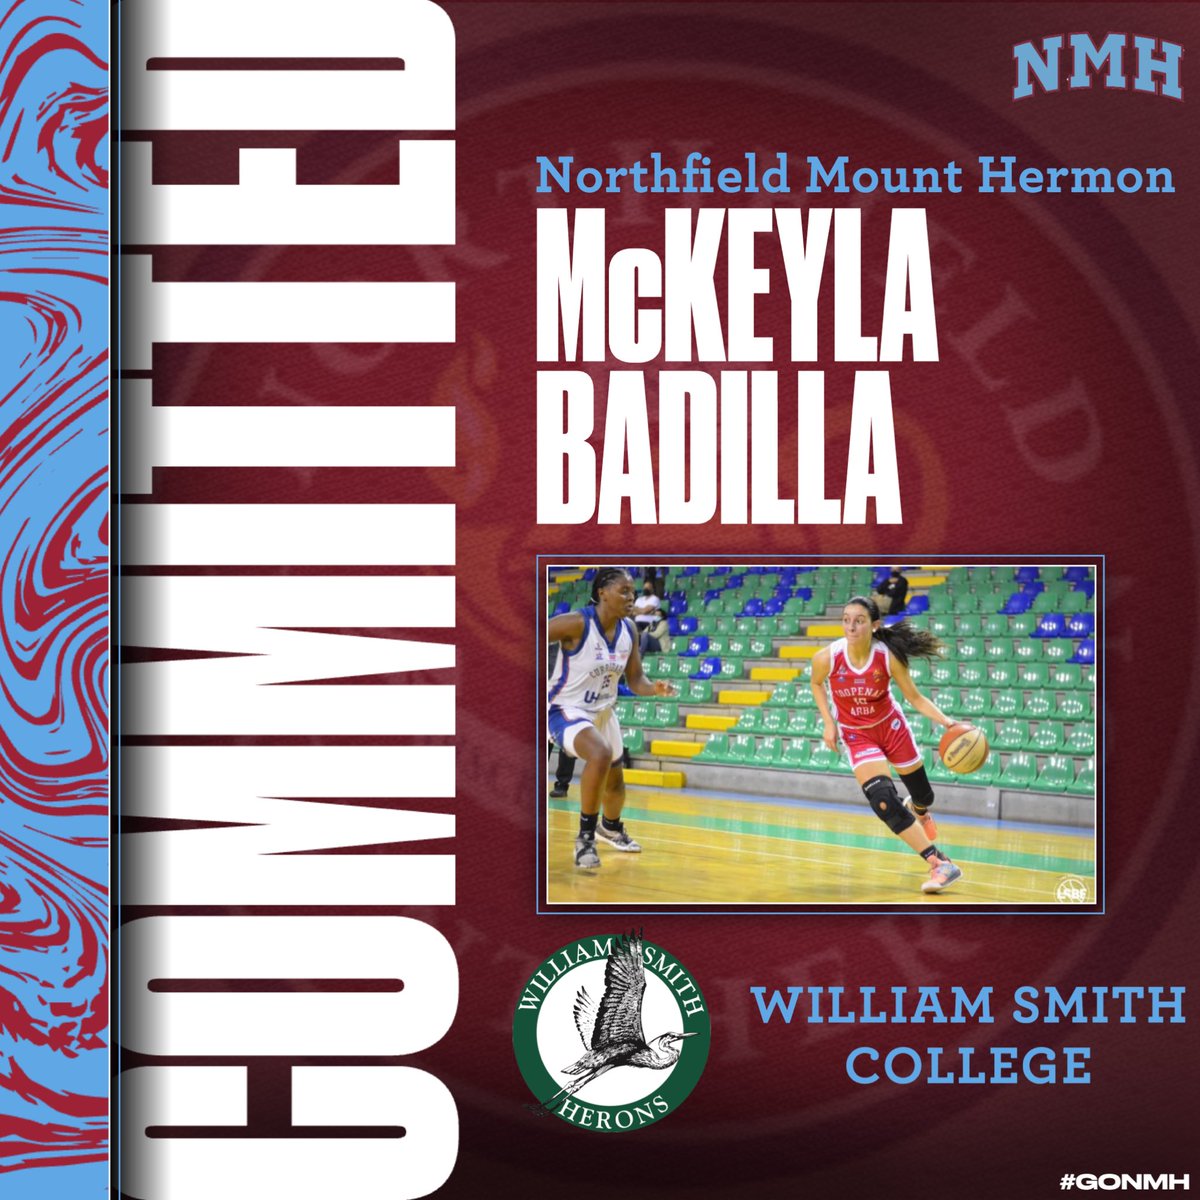 Congrats to McKeyla Badilla ‘23 on her commitment to William Smith, pending admission! #GoNMH #NMHcommits #GoHerons